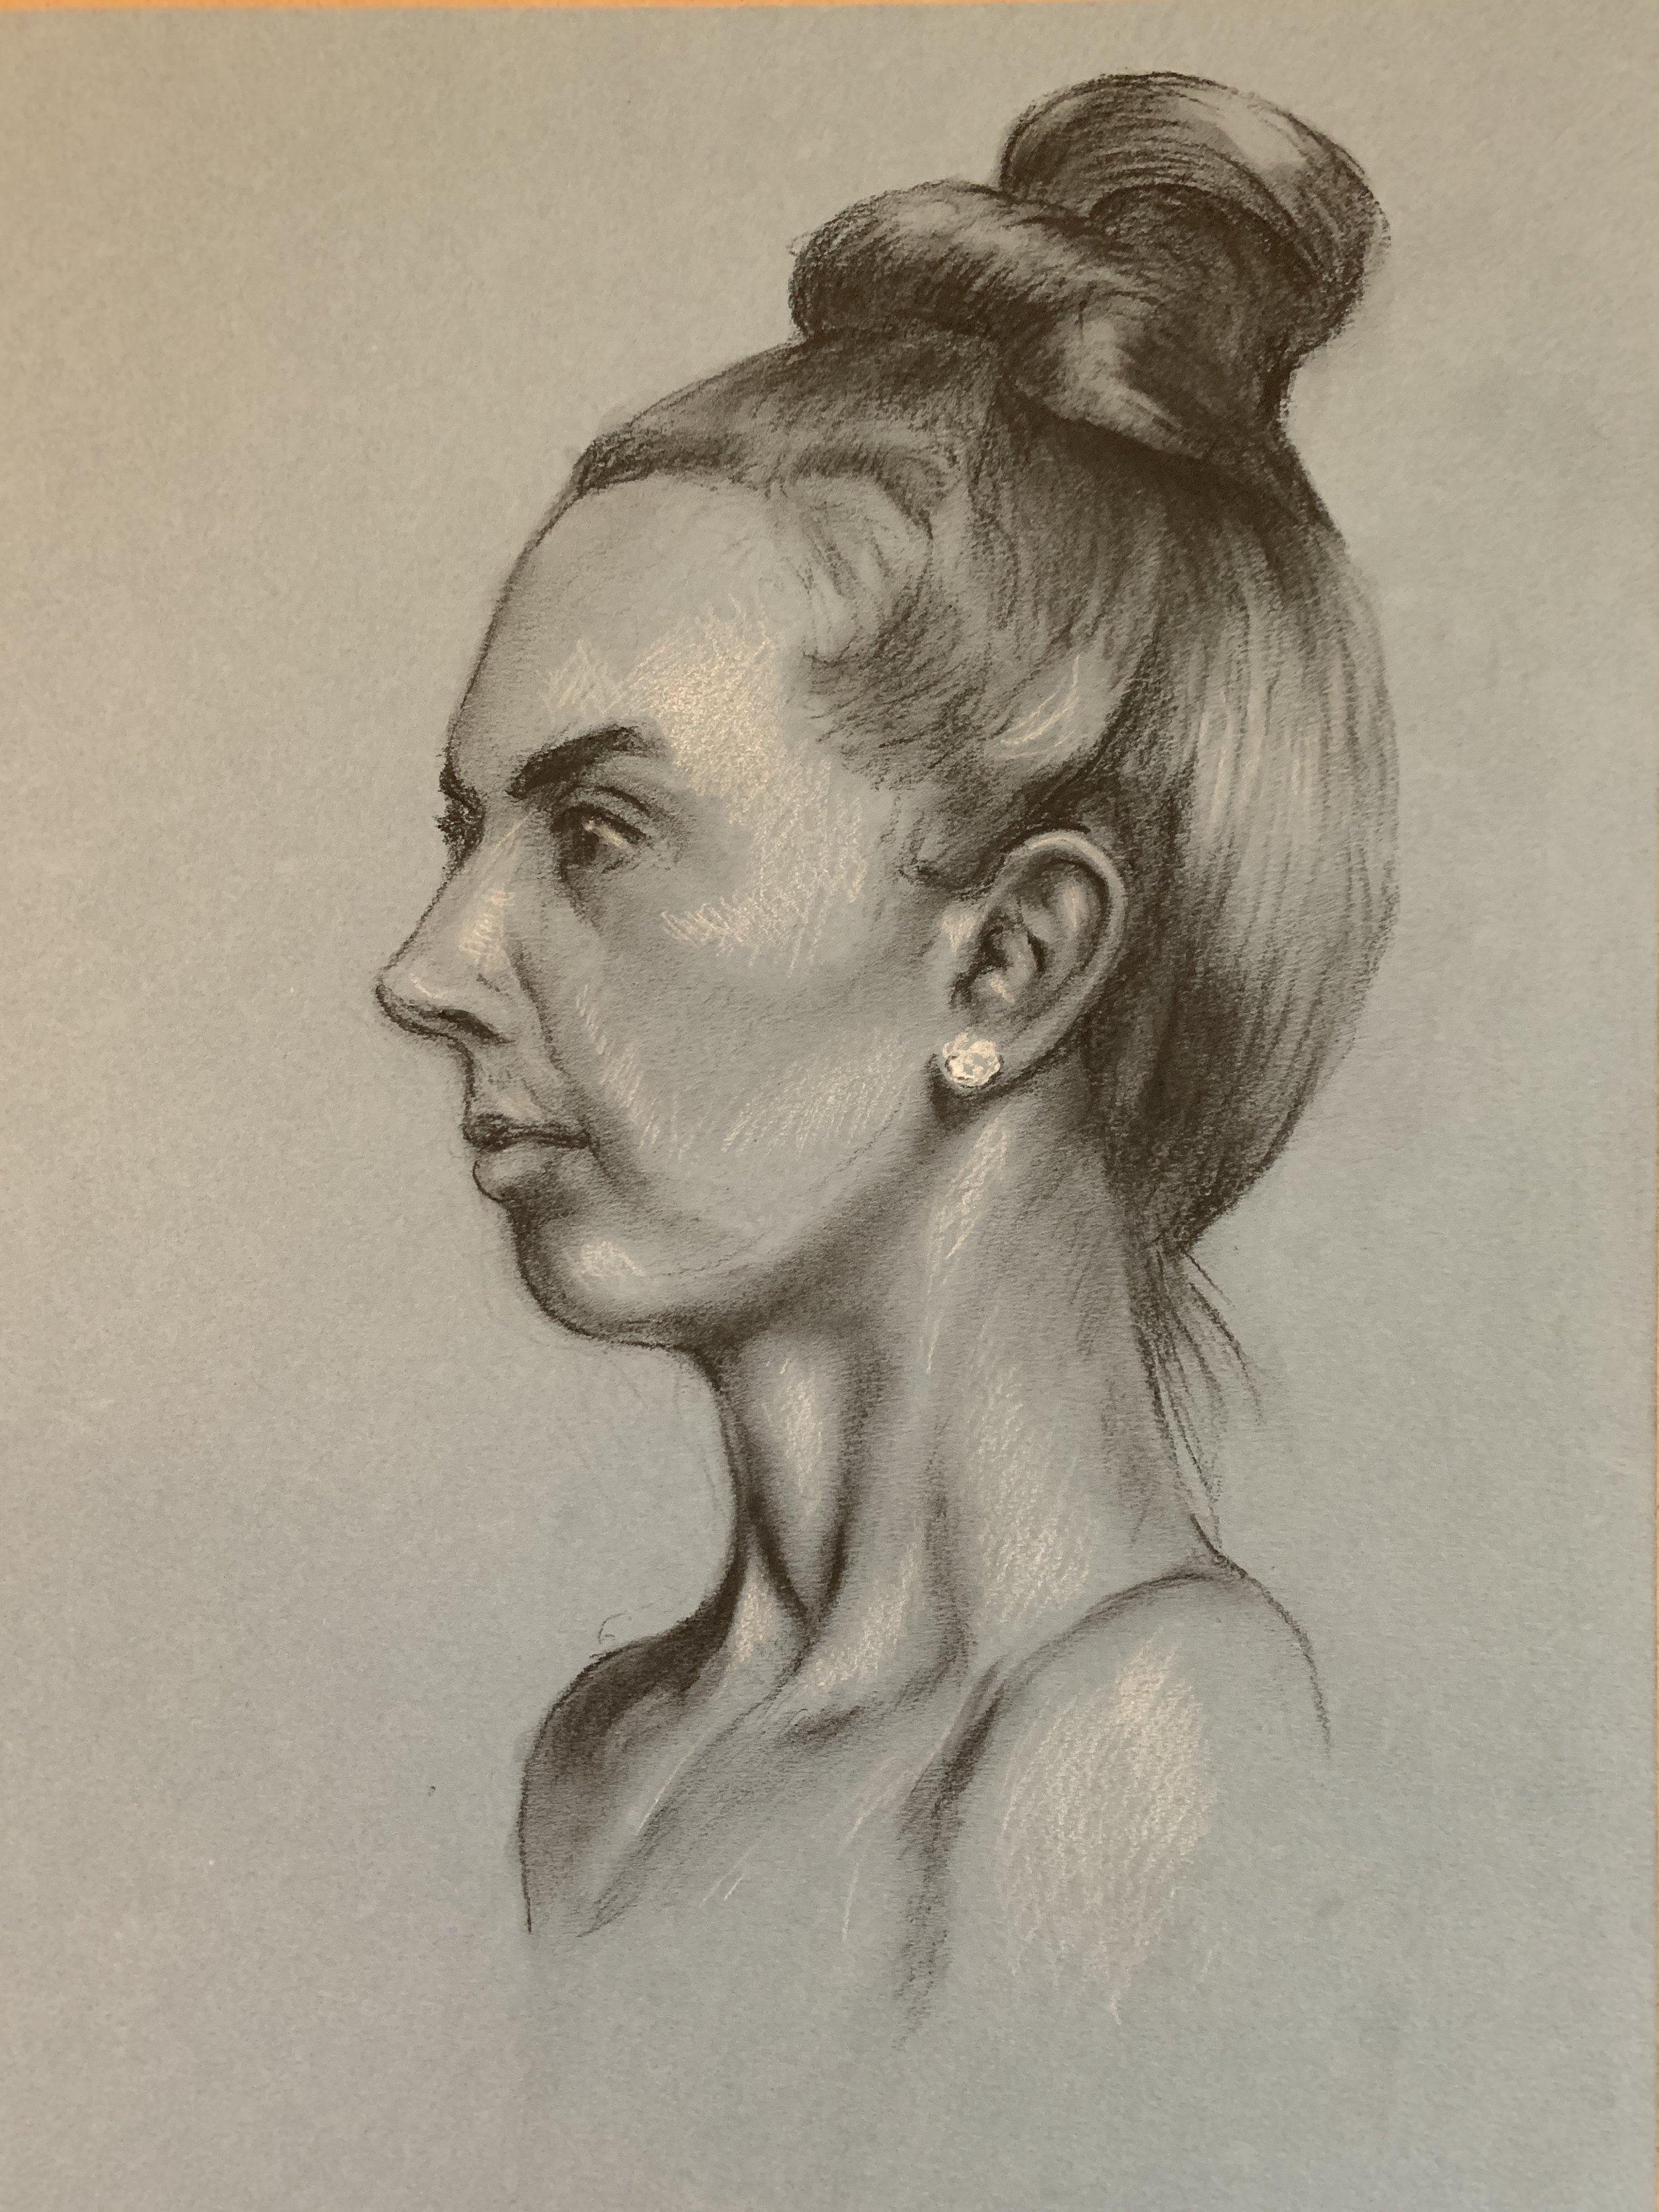 PORTRAIT OF SARA, charcoal on paper, 2023, 12" x 16"